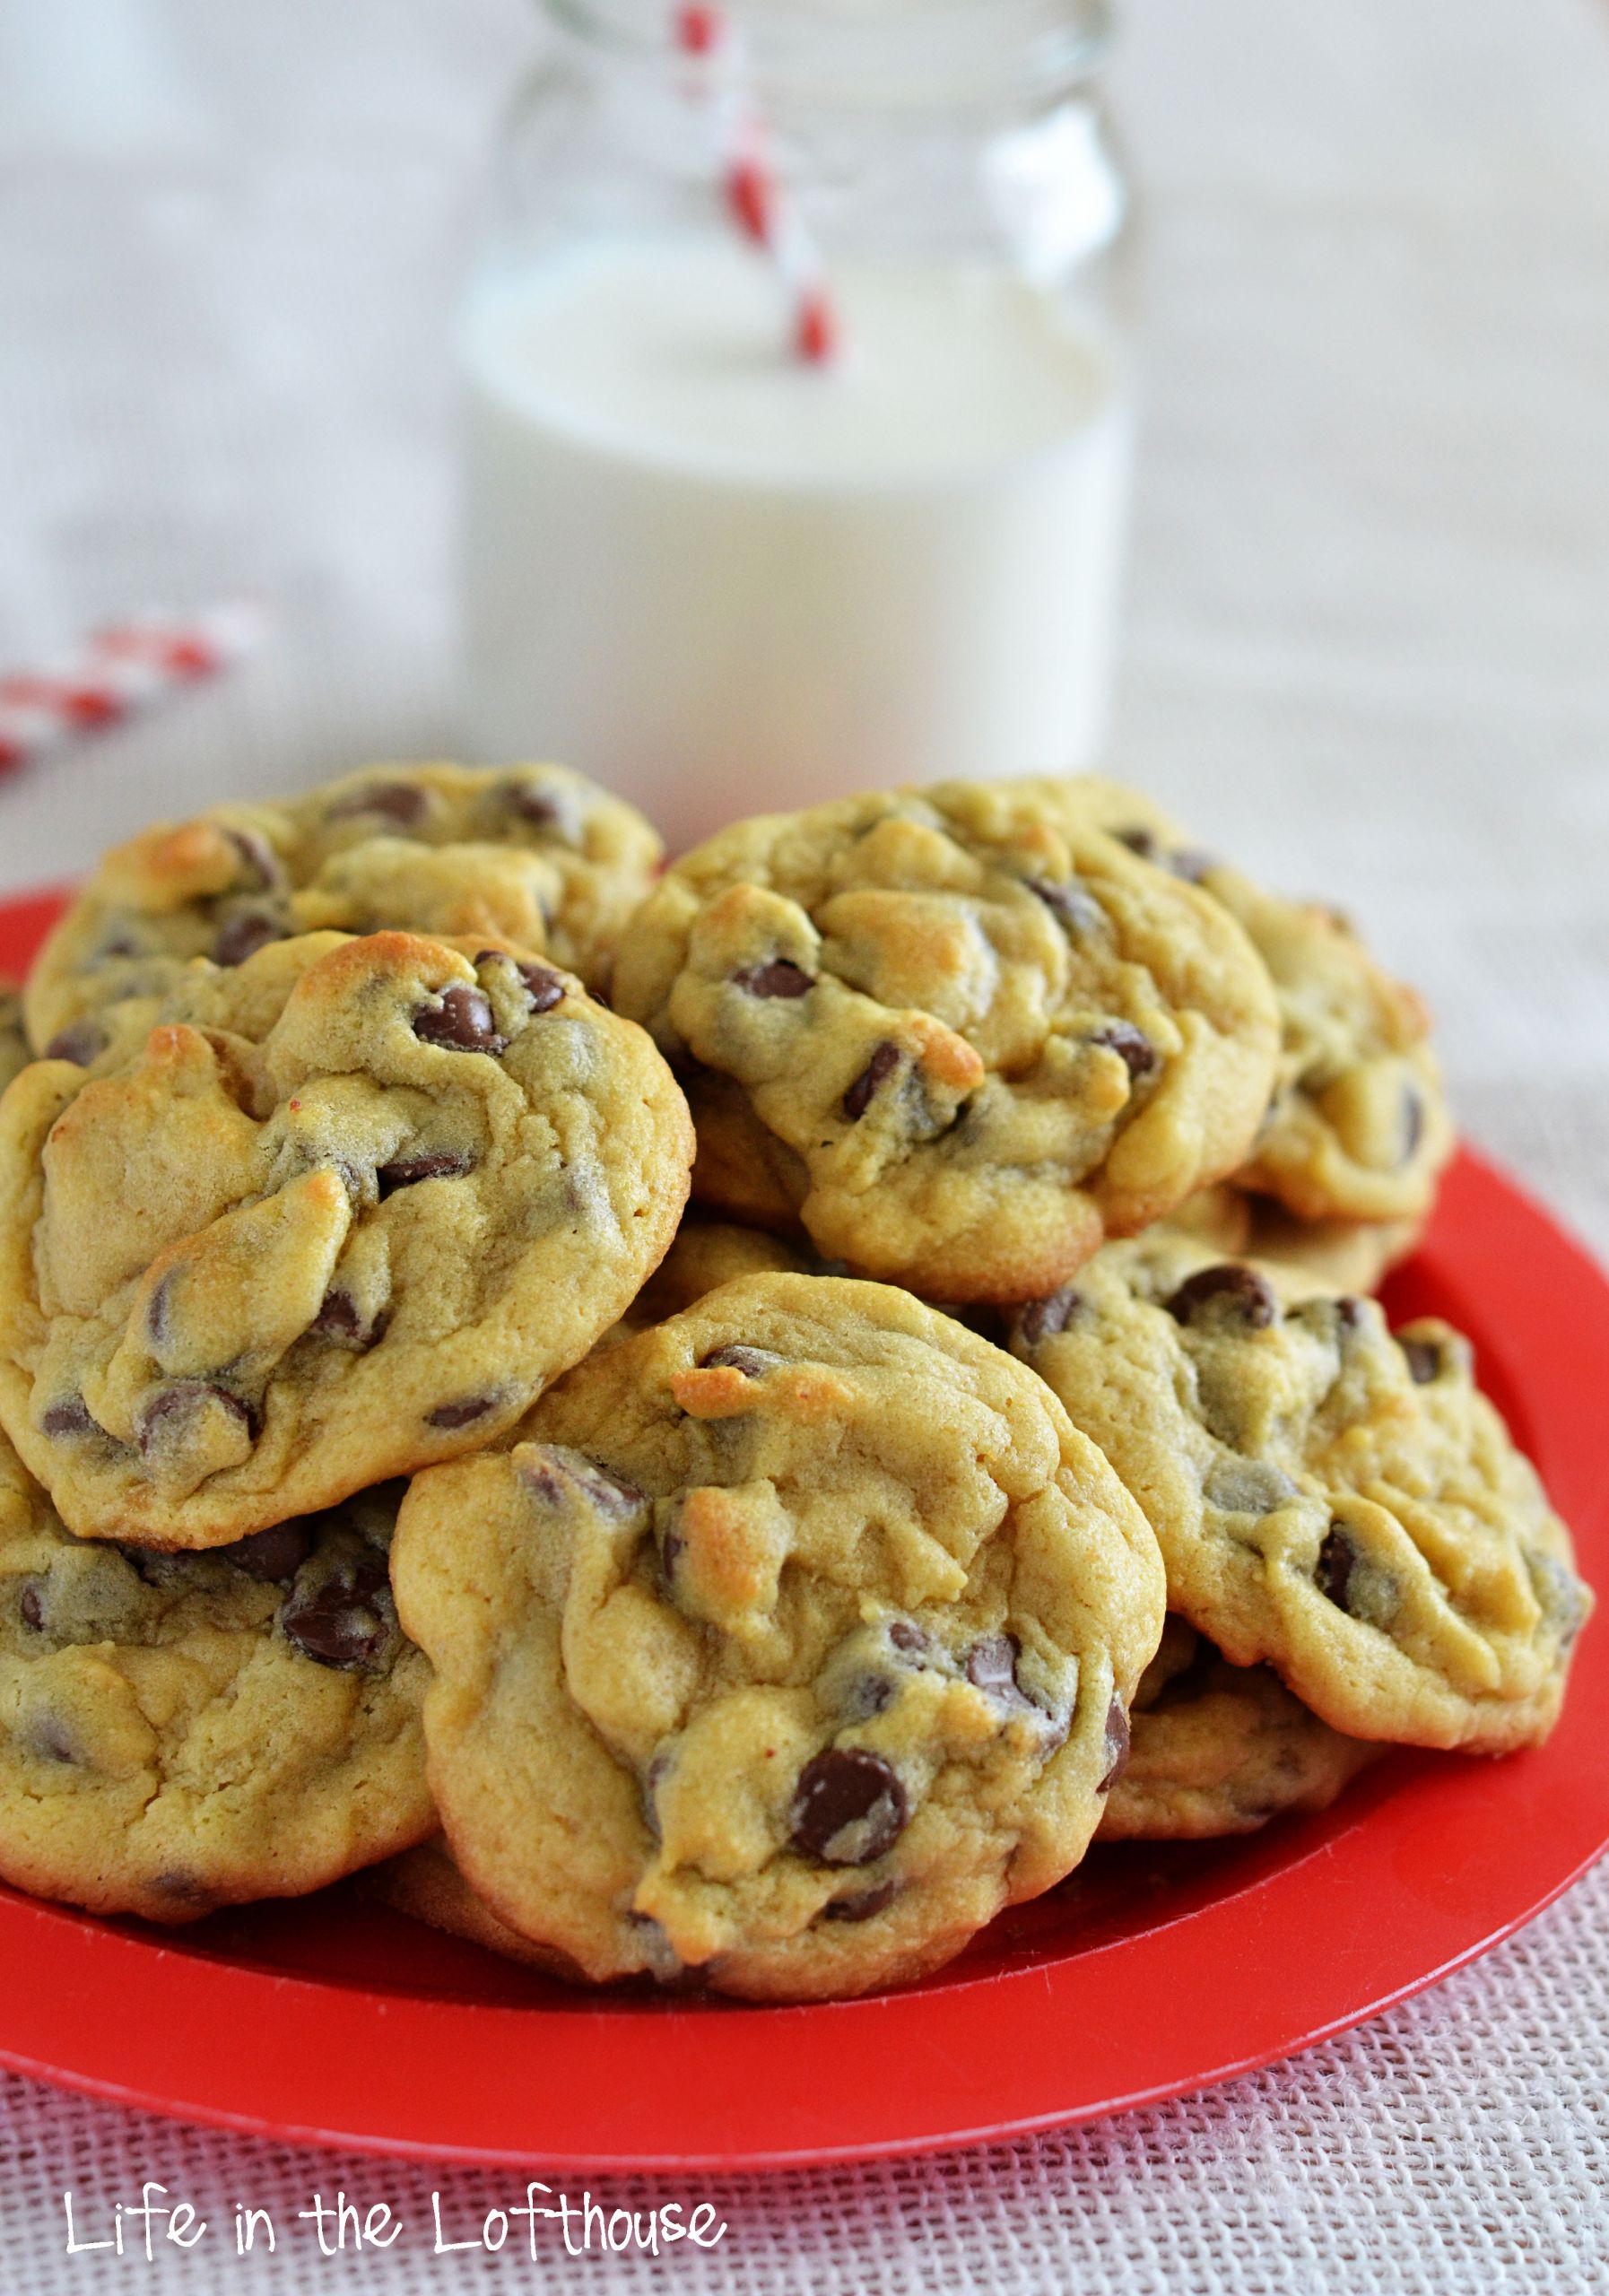 Pudding Chocolate Chip Cookies
 Chocolate Chip Pudding Cookies